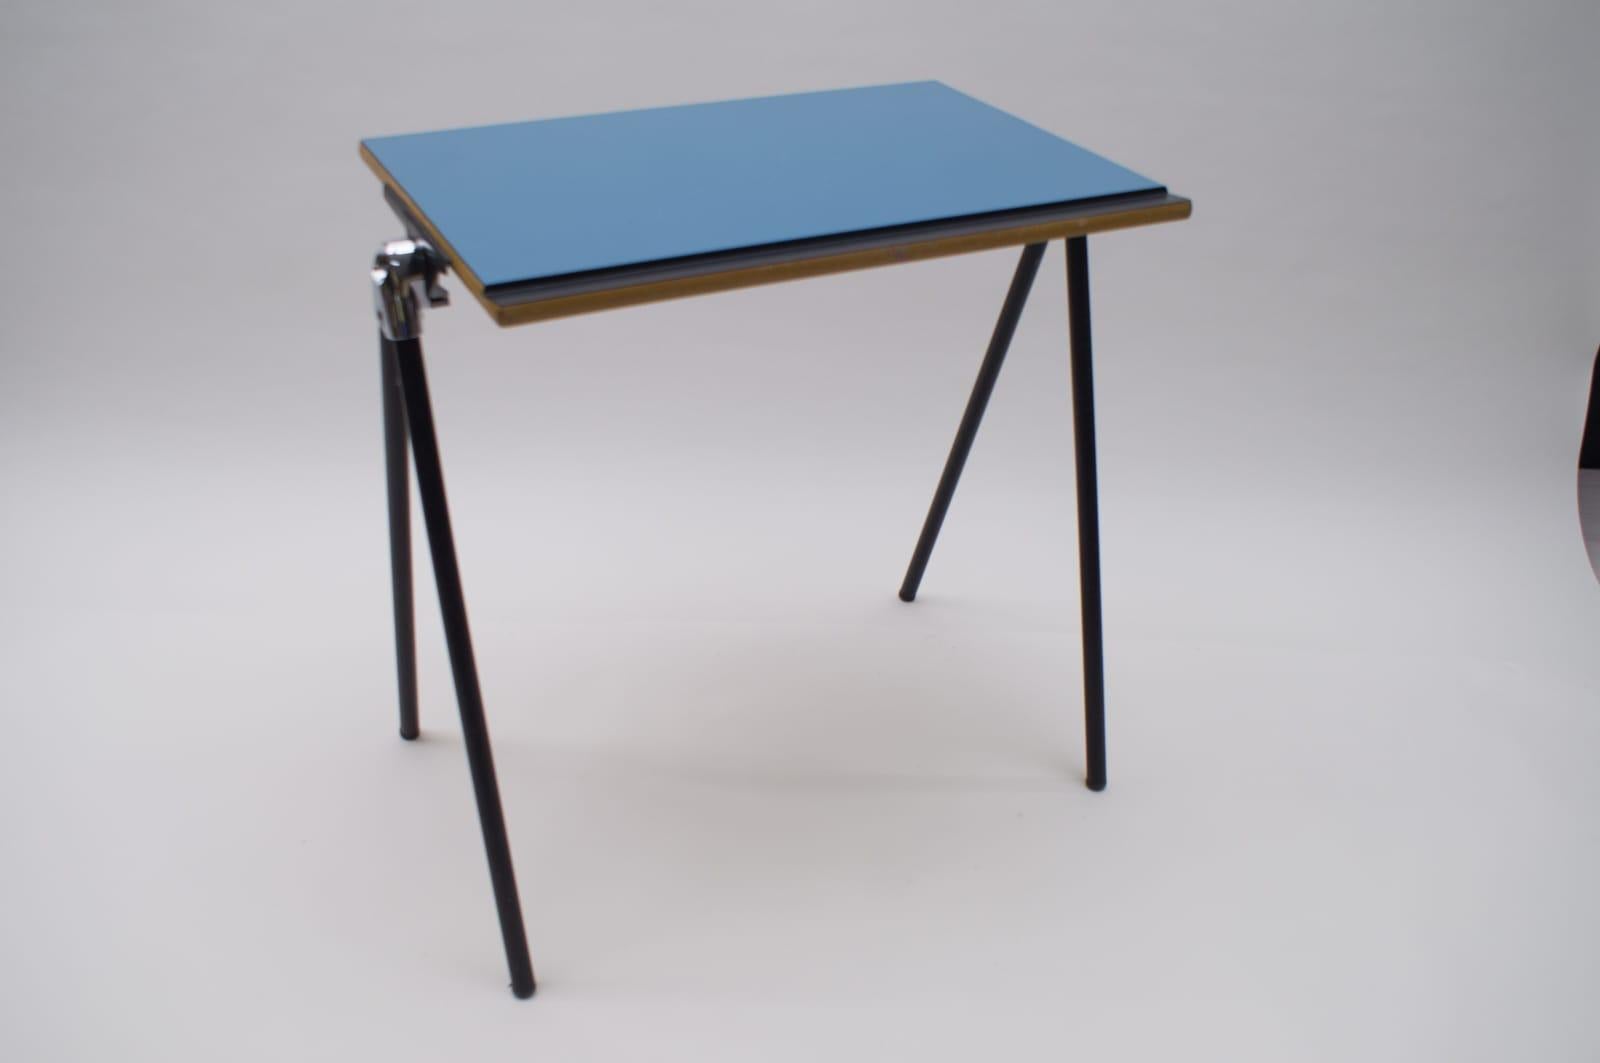 School desk and chair (Palini)
1960

The Castiglionis with Caccia Dominioni presented several prototypes manufactured by Palini including T12 ( with the same pen tray as this one), which was awarded the Compasso d’Oro, 1960. These are stackable